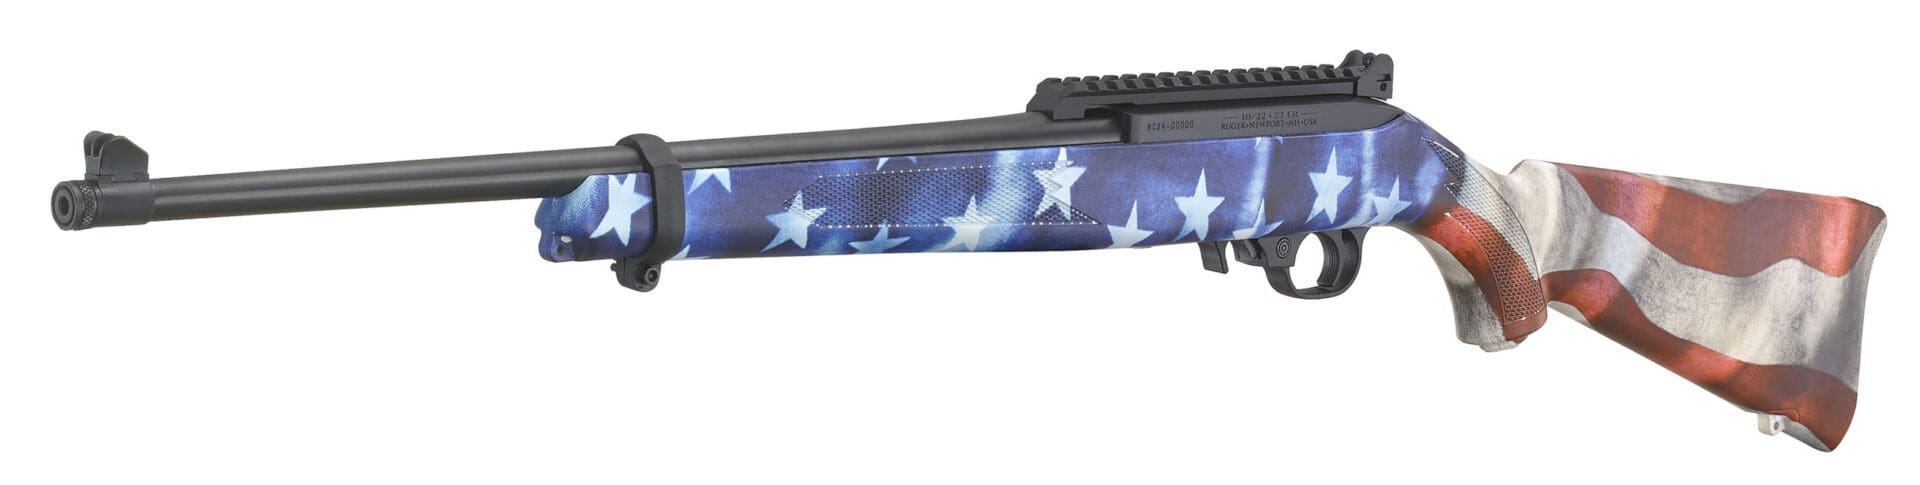 Ruger Vote 2020 10/22 Rifle